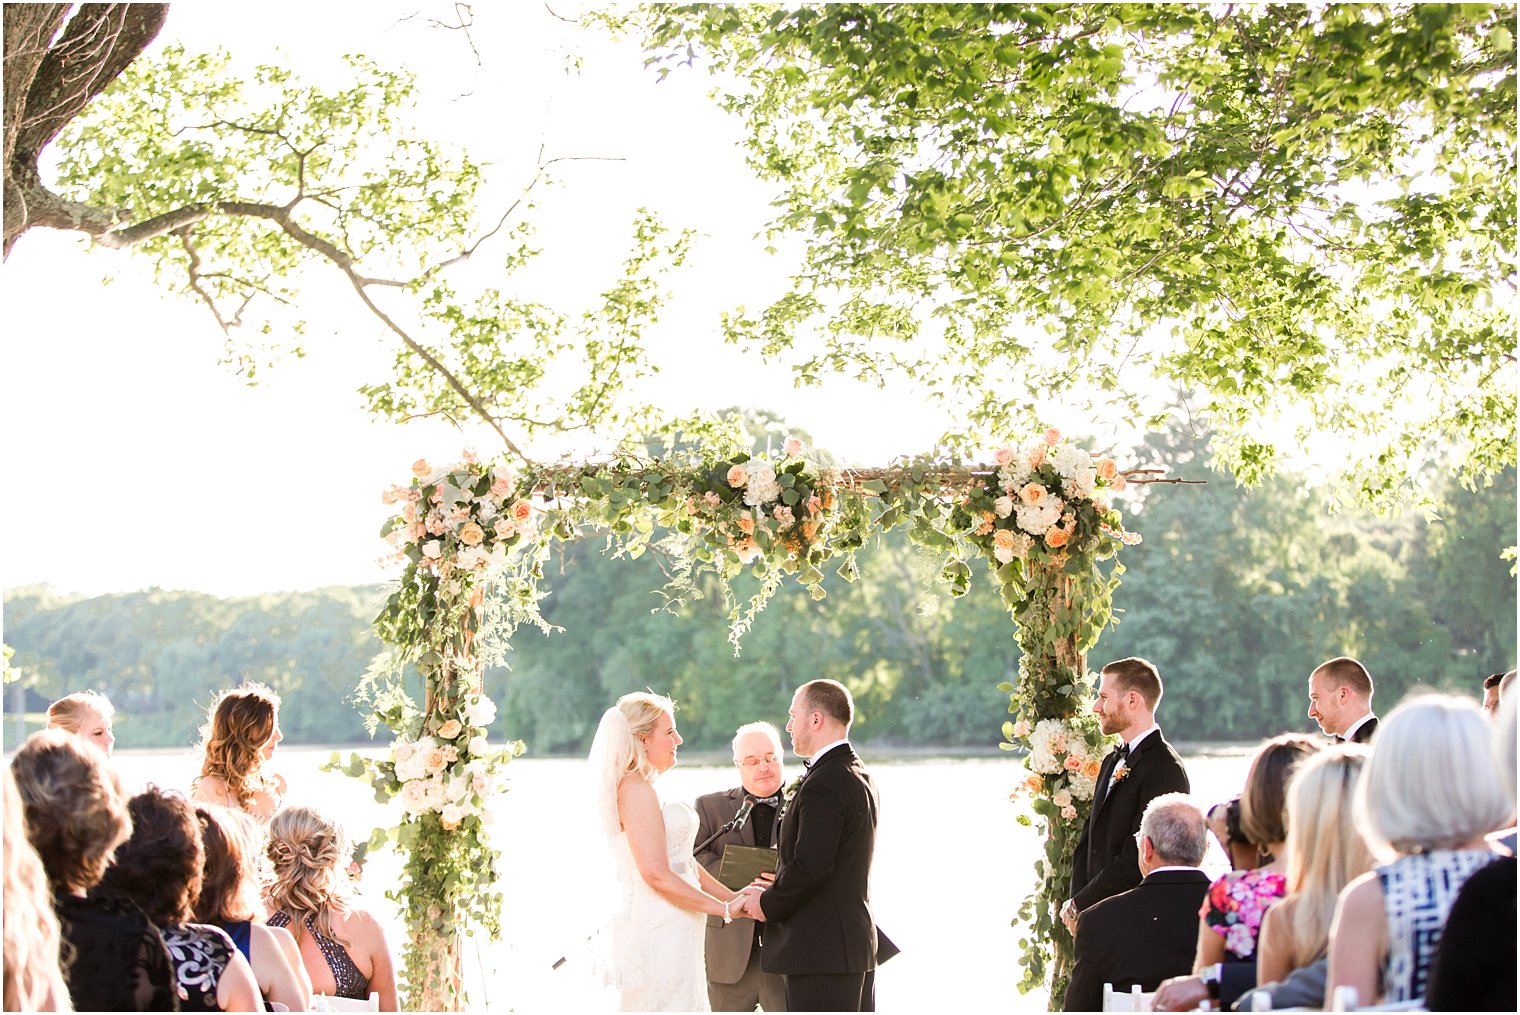 Florals for outdoor ceremony